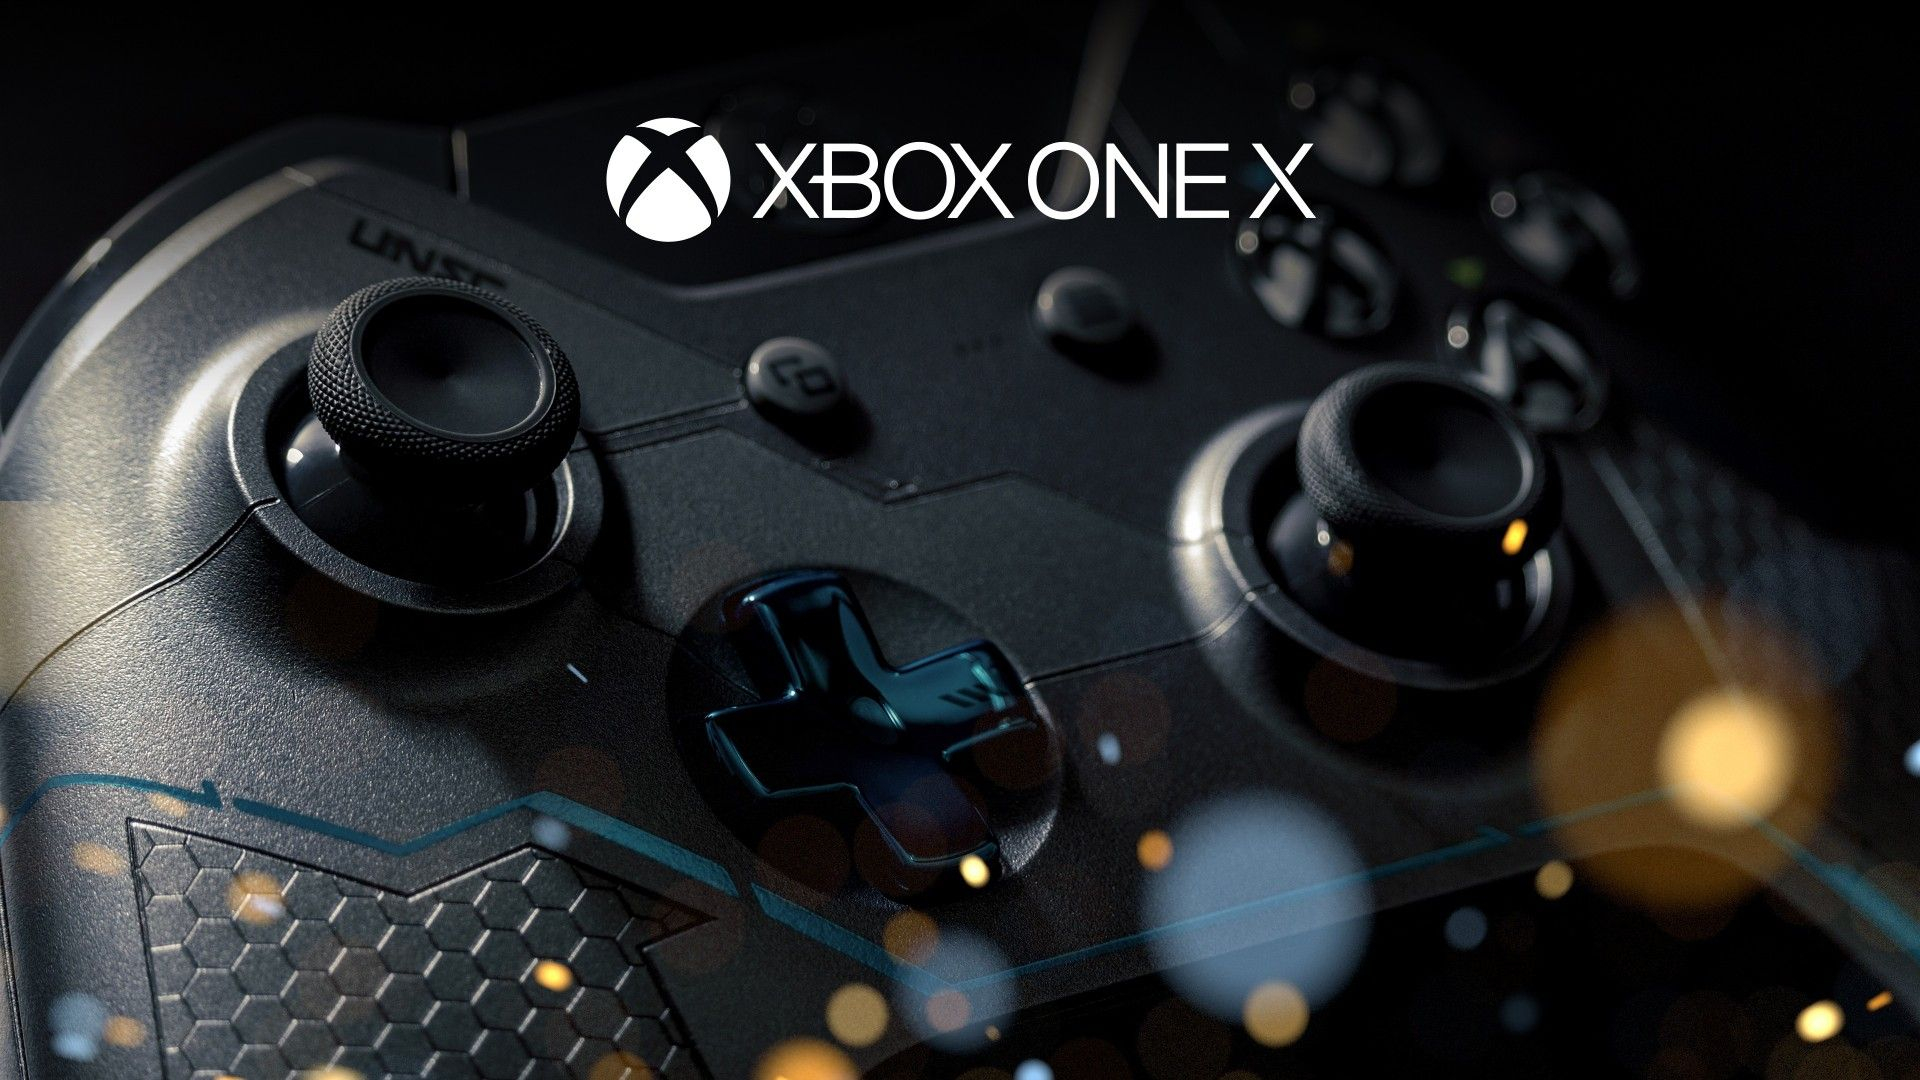 1920x1080 Xbox one Full Hd wallpaper | Xbox, Xbox one, Gaming console